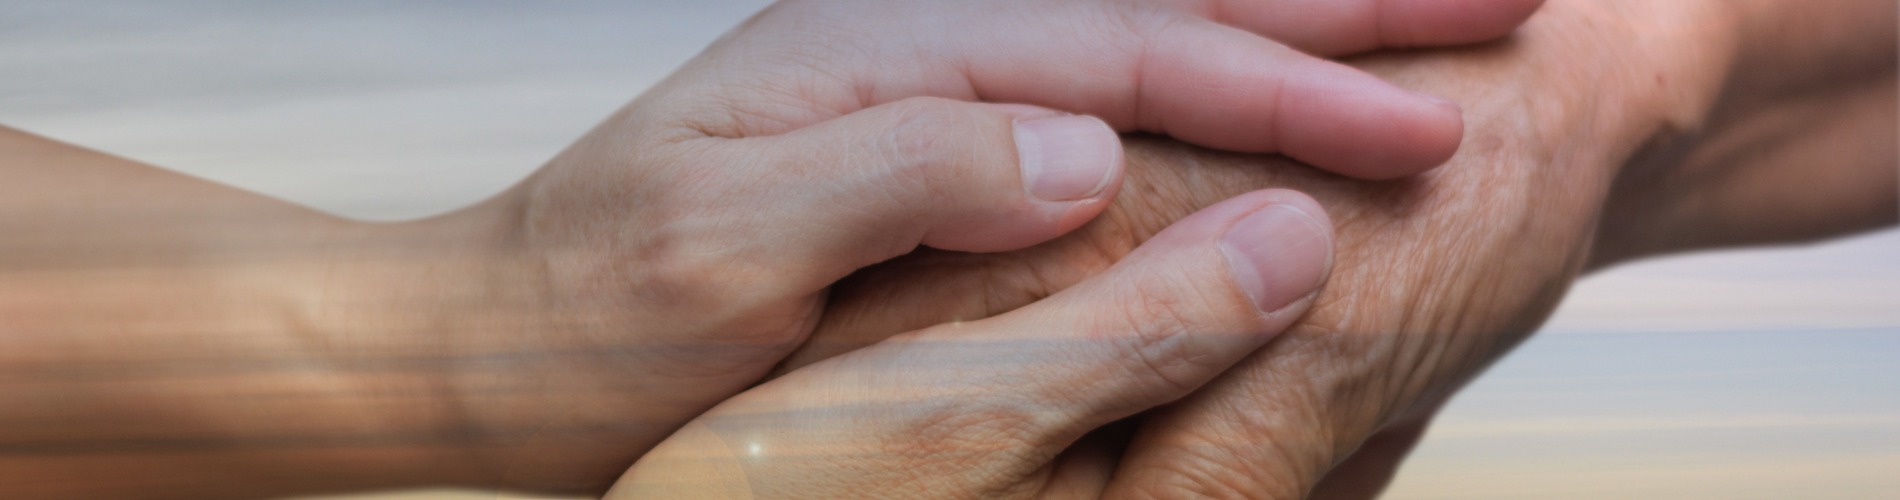 caregiver-carer-hand-holding-elder-hand-in-hospice-care-with-sky-sunset-background-euthanasia 1900x500